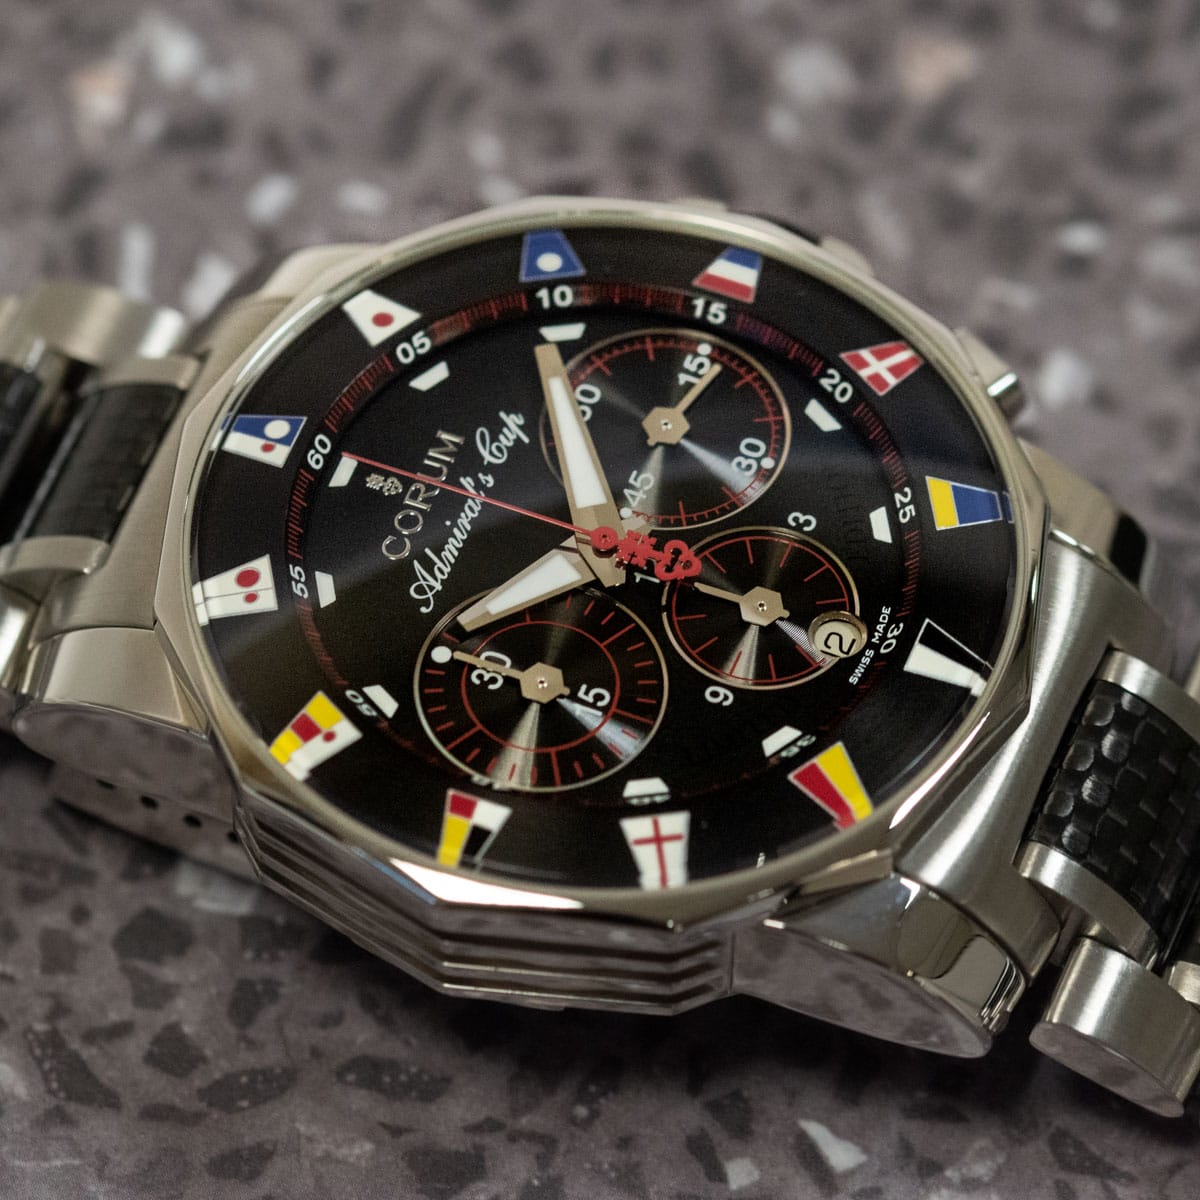 Stylied photo of  of Admiral's Cup Chronograph Regatta Ltd. Ed.